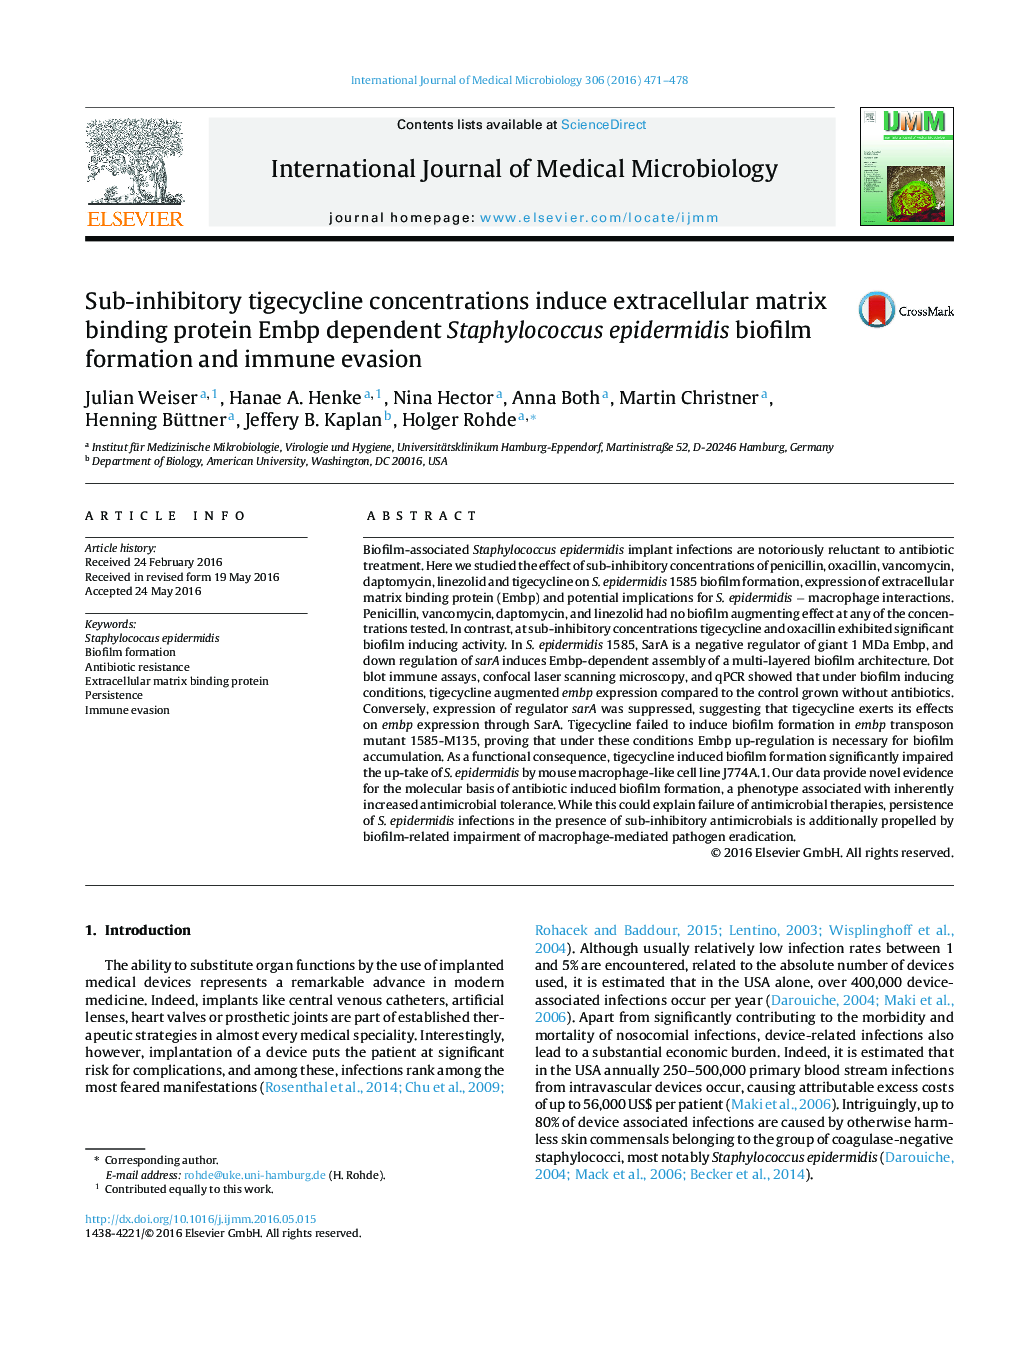 Sub-inhibitory tigecycline concentrations induce extracellular matrix binding protein Embp dependent Staphylococcus epidermidis biofilm formation and immune evasion